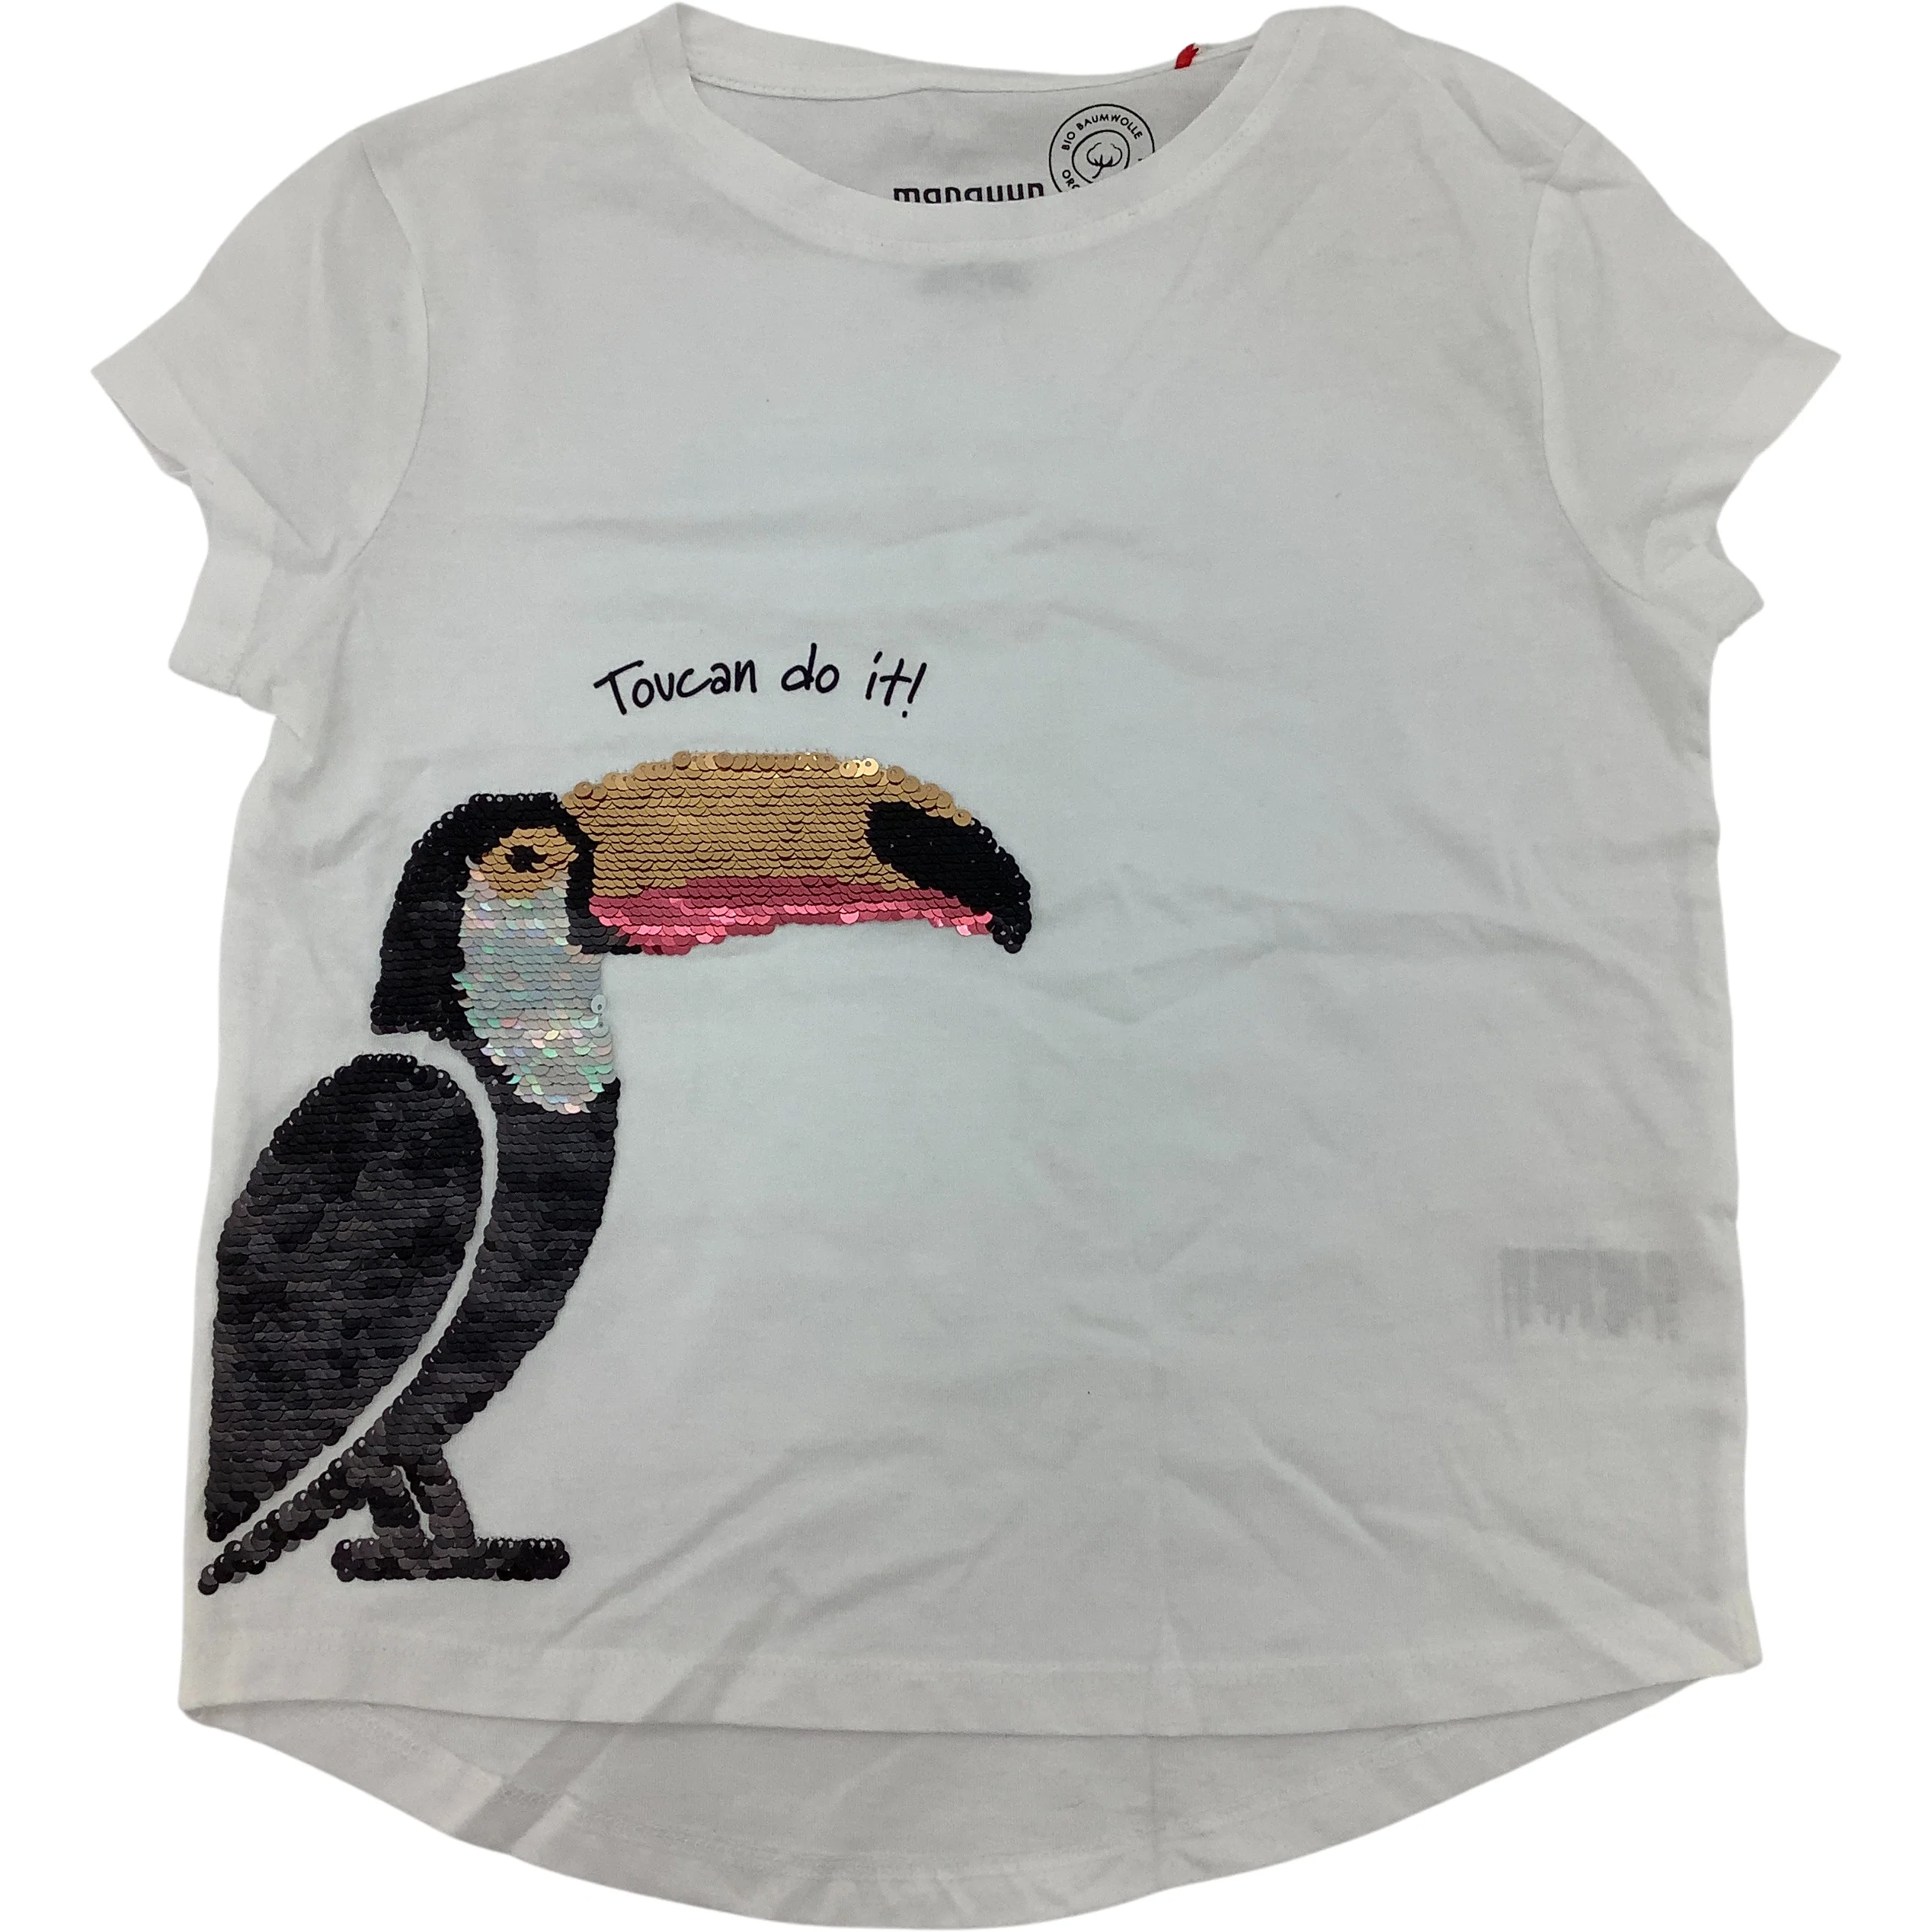 Manguun Girl's T-Shirt / White / Toucan / Reversible Sequins / Kid's Summer Clothes / Various Sizes